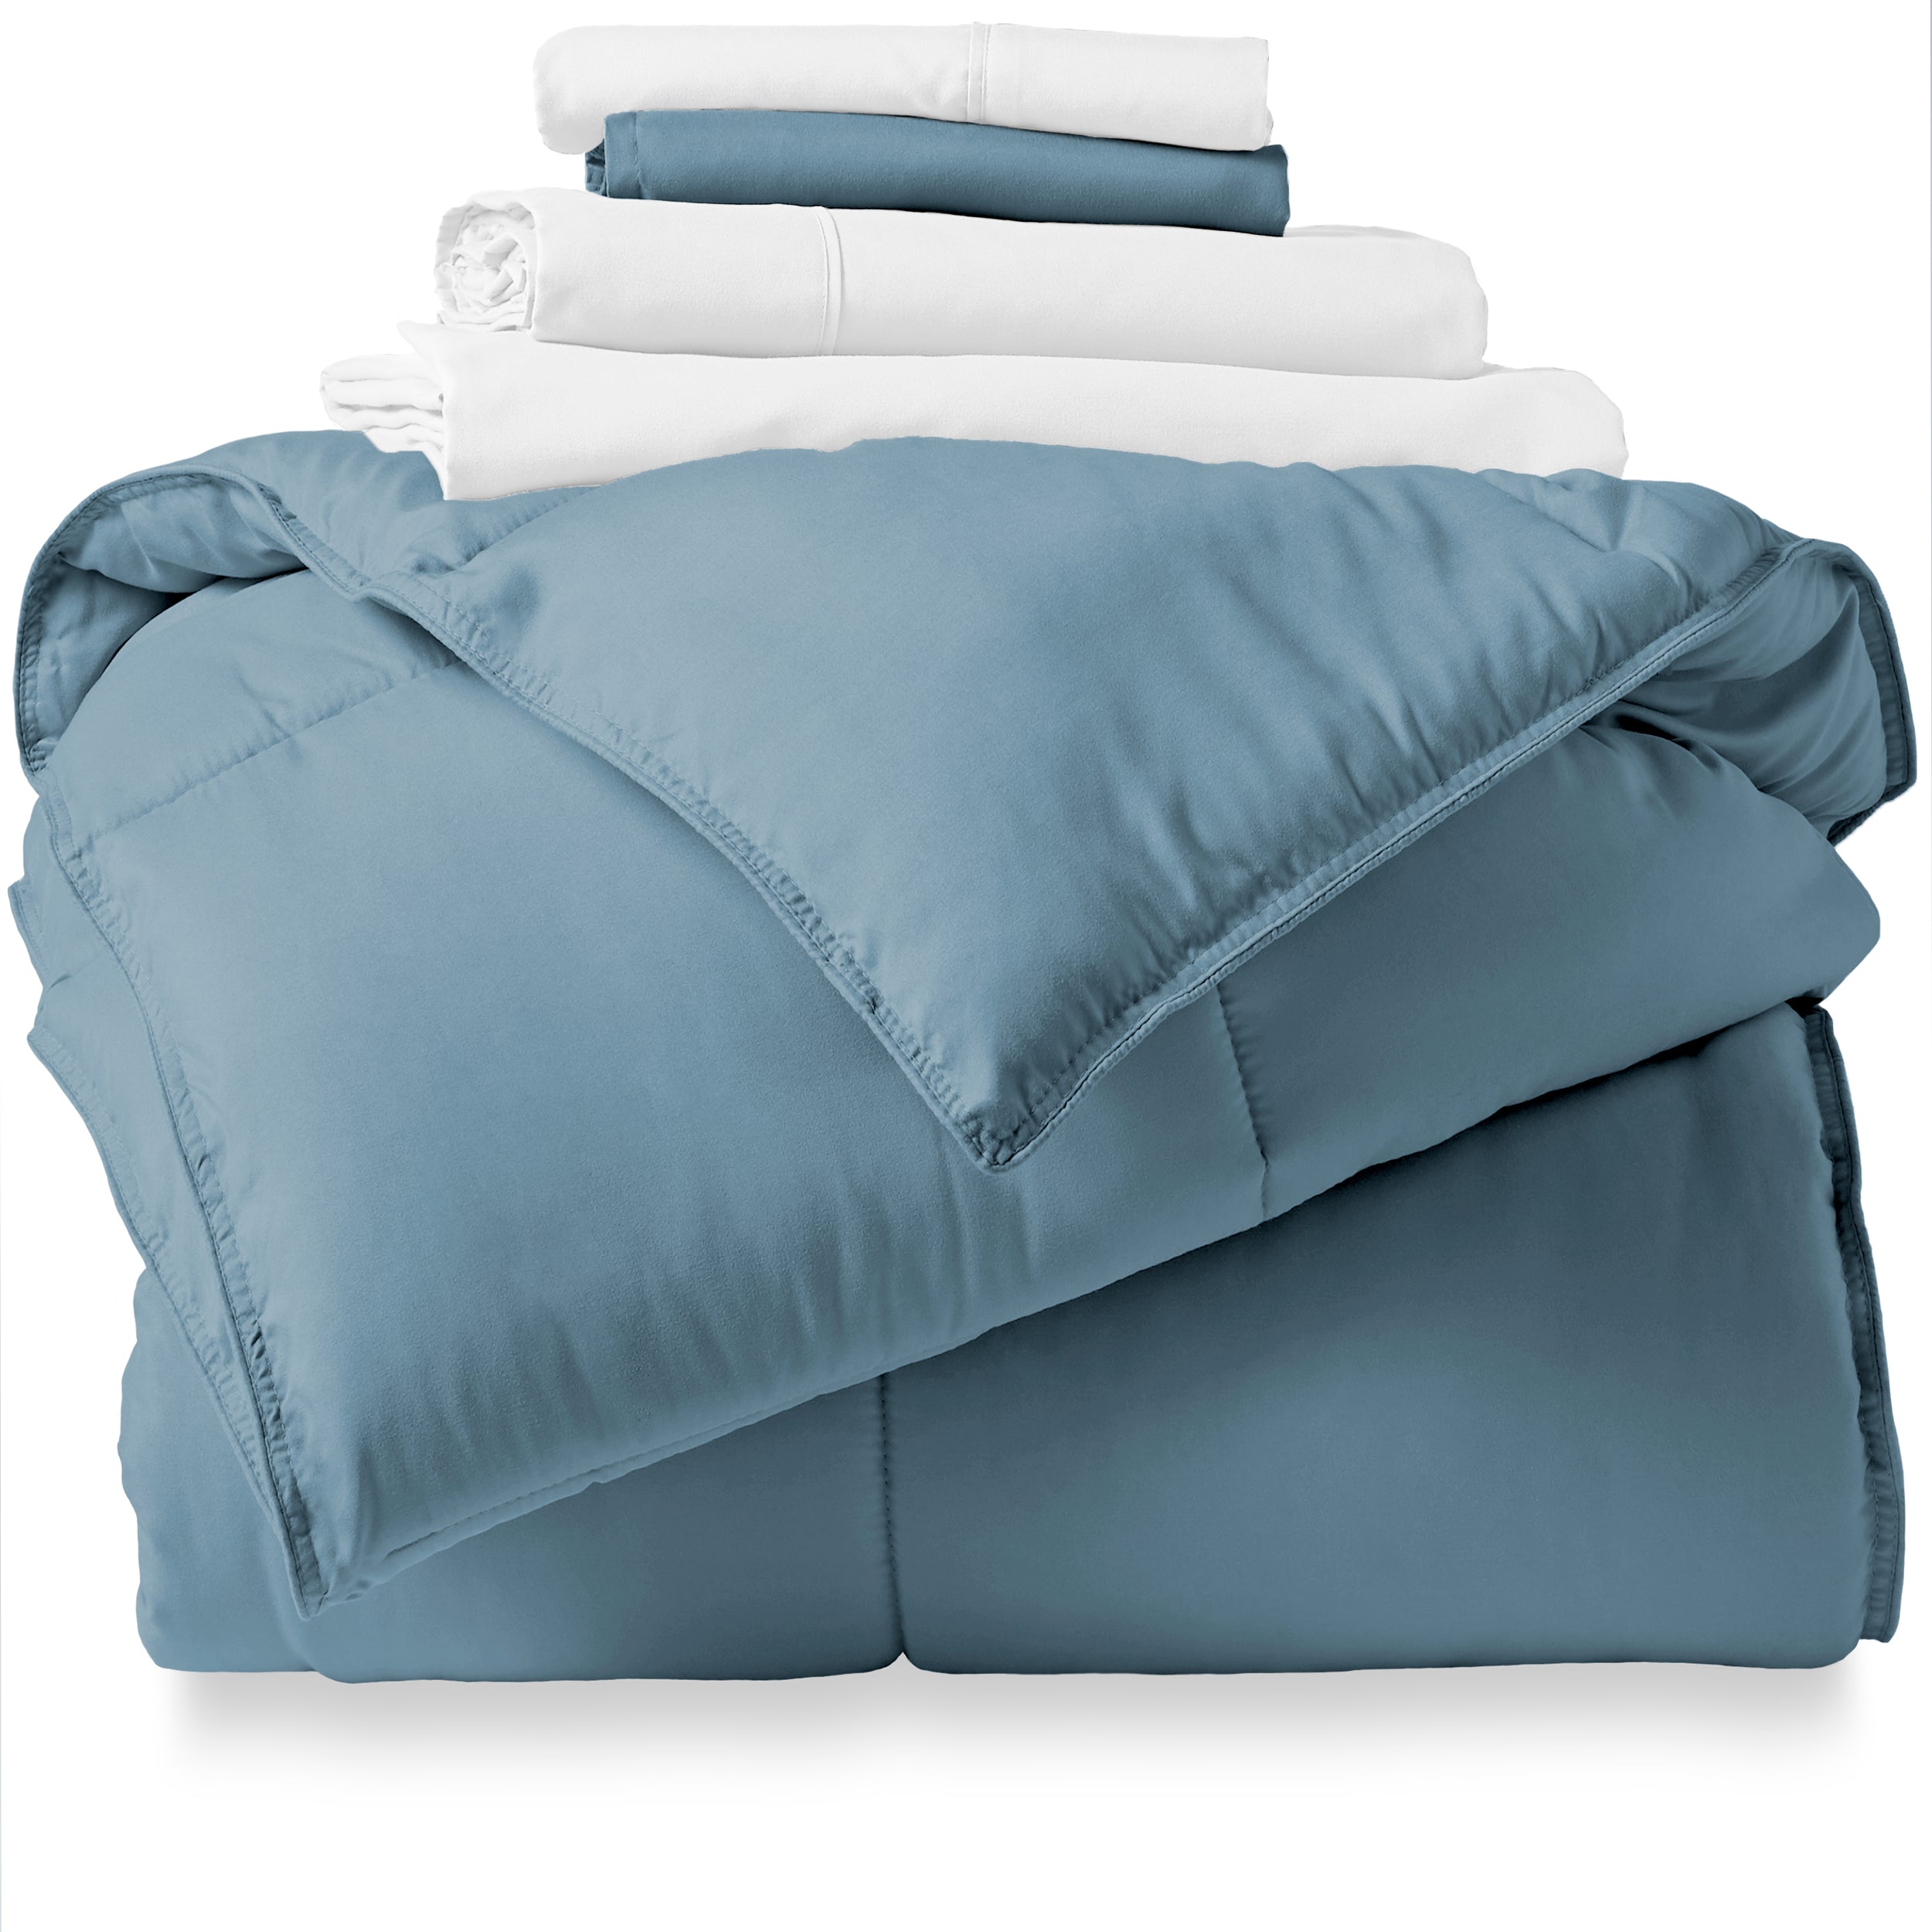 Coronet Blue Comforter White Sheets Bed-in-a-bag